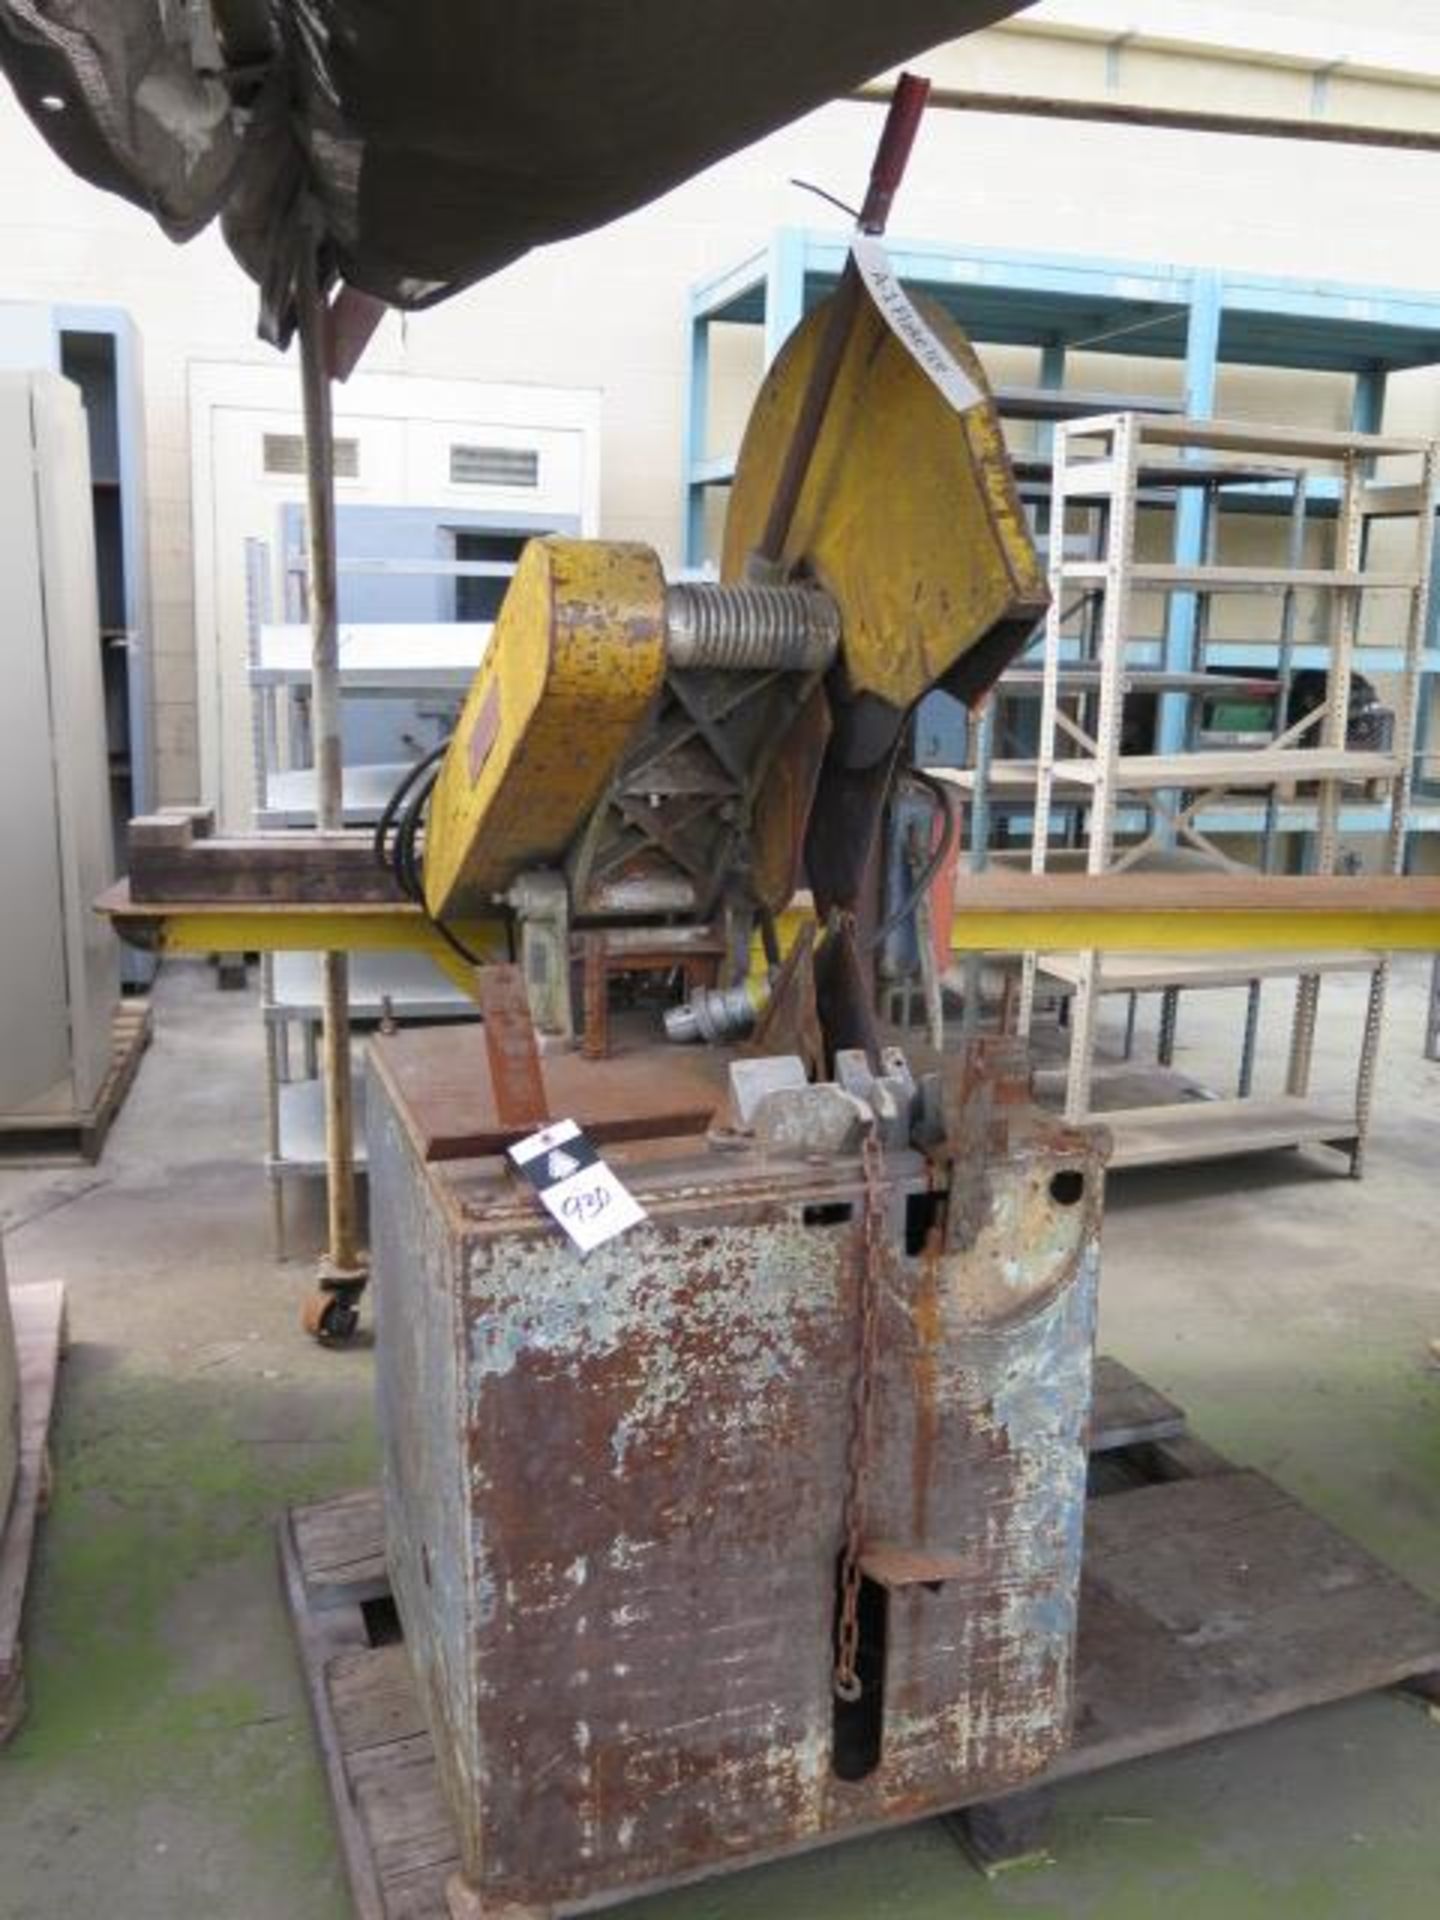 Everett mdl. 20-22 Abrasive Cutoff Saw w/ Chain Vise (SOLD AS-IS - NO WARRANTY) - Image 3 of 5